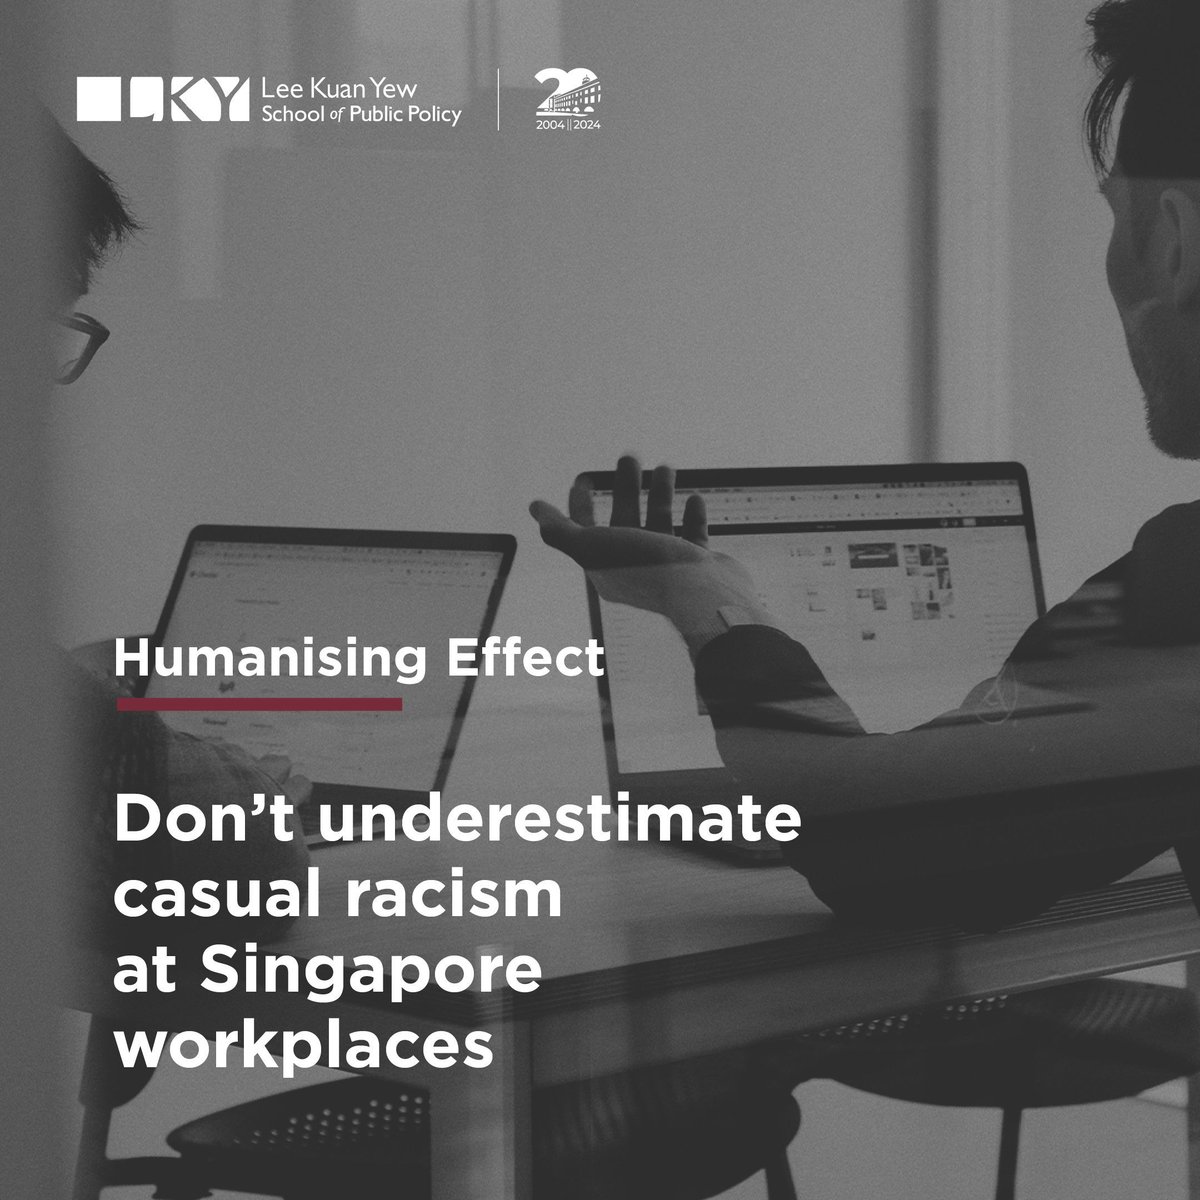 Diversity is Singapore's strength, but challenges remain. A recent IPS report reveals that 1 in 5 minority residents face workplace discrimination. Dr Mathew Mathews and Melvin Tay discuss the implications. buff.ly/3UuFcTI #SG #Casualracism #LKYSPP